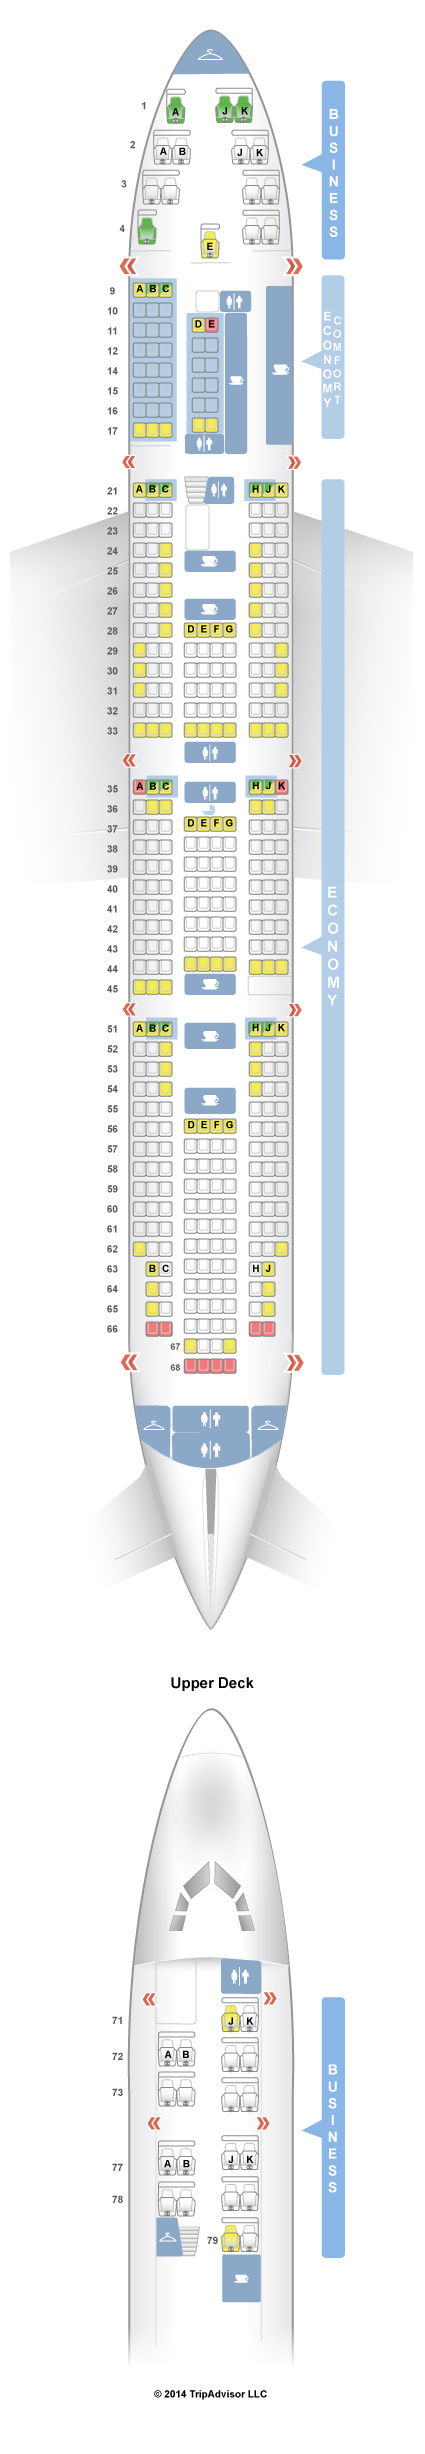 Klm Boeing 747 400 Seating Chart